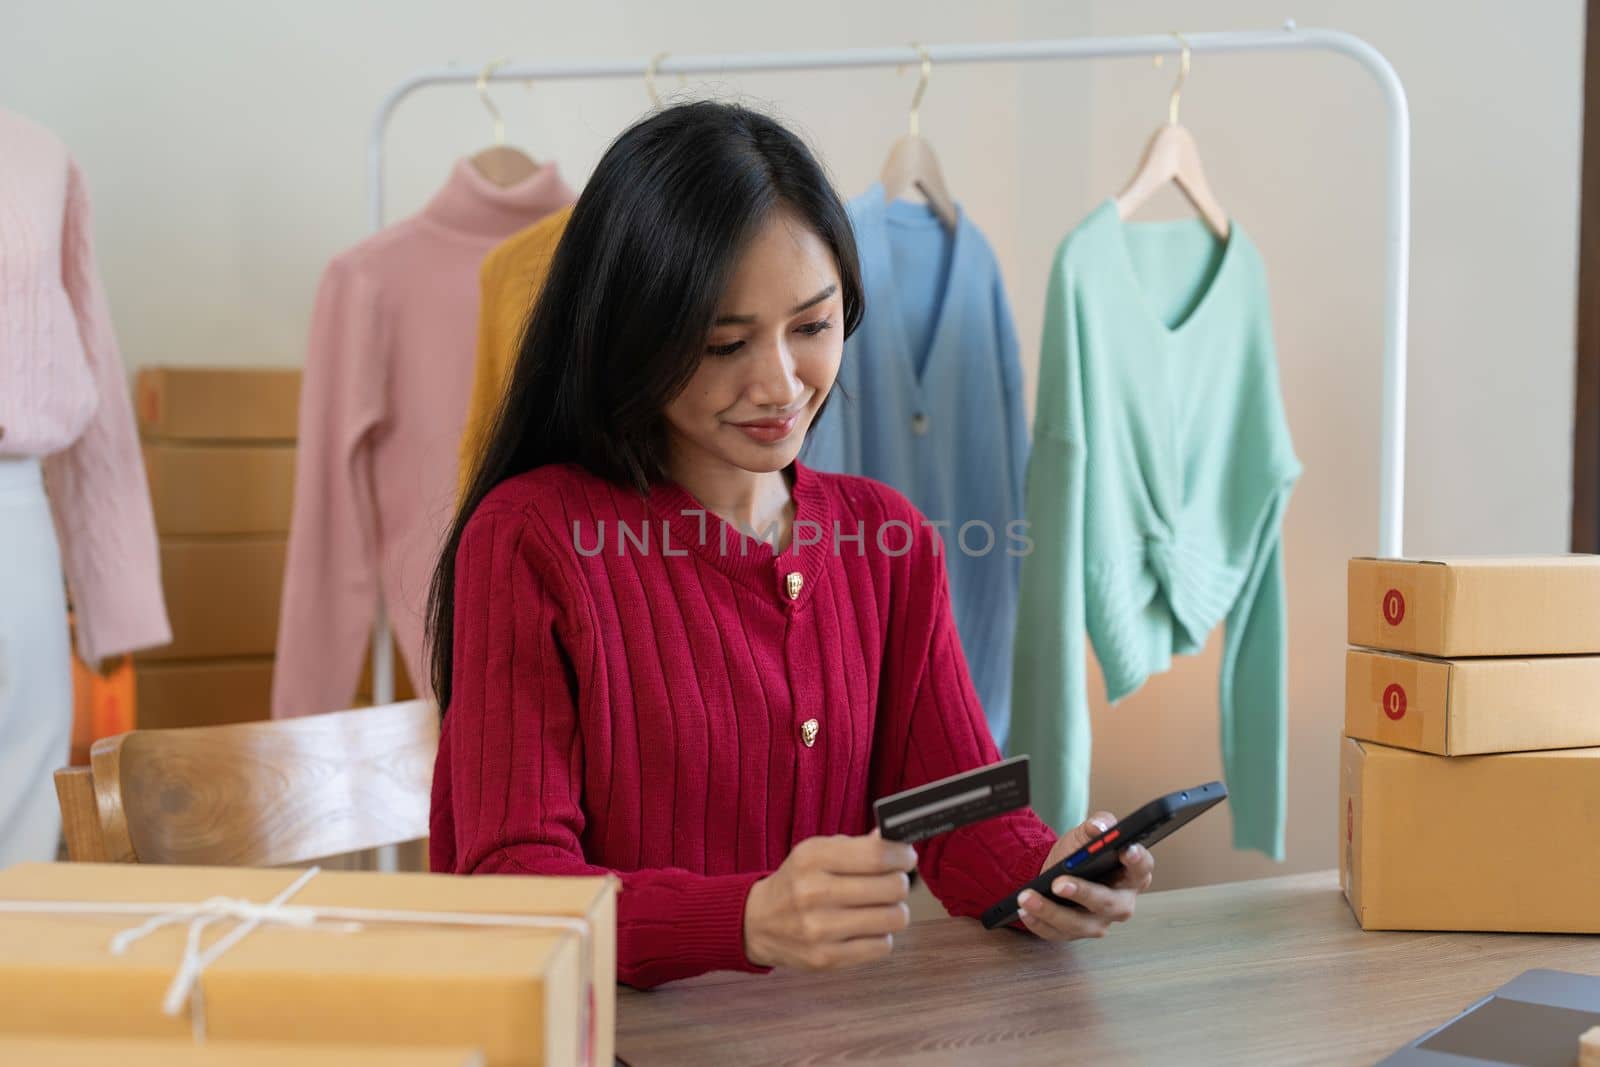 Young person using credit card and laptop computer. Online shopping, e-commerce concept.